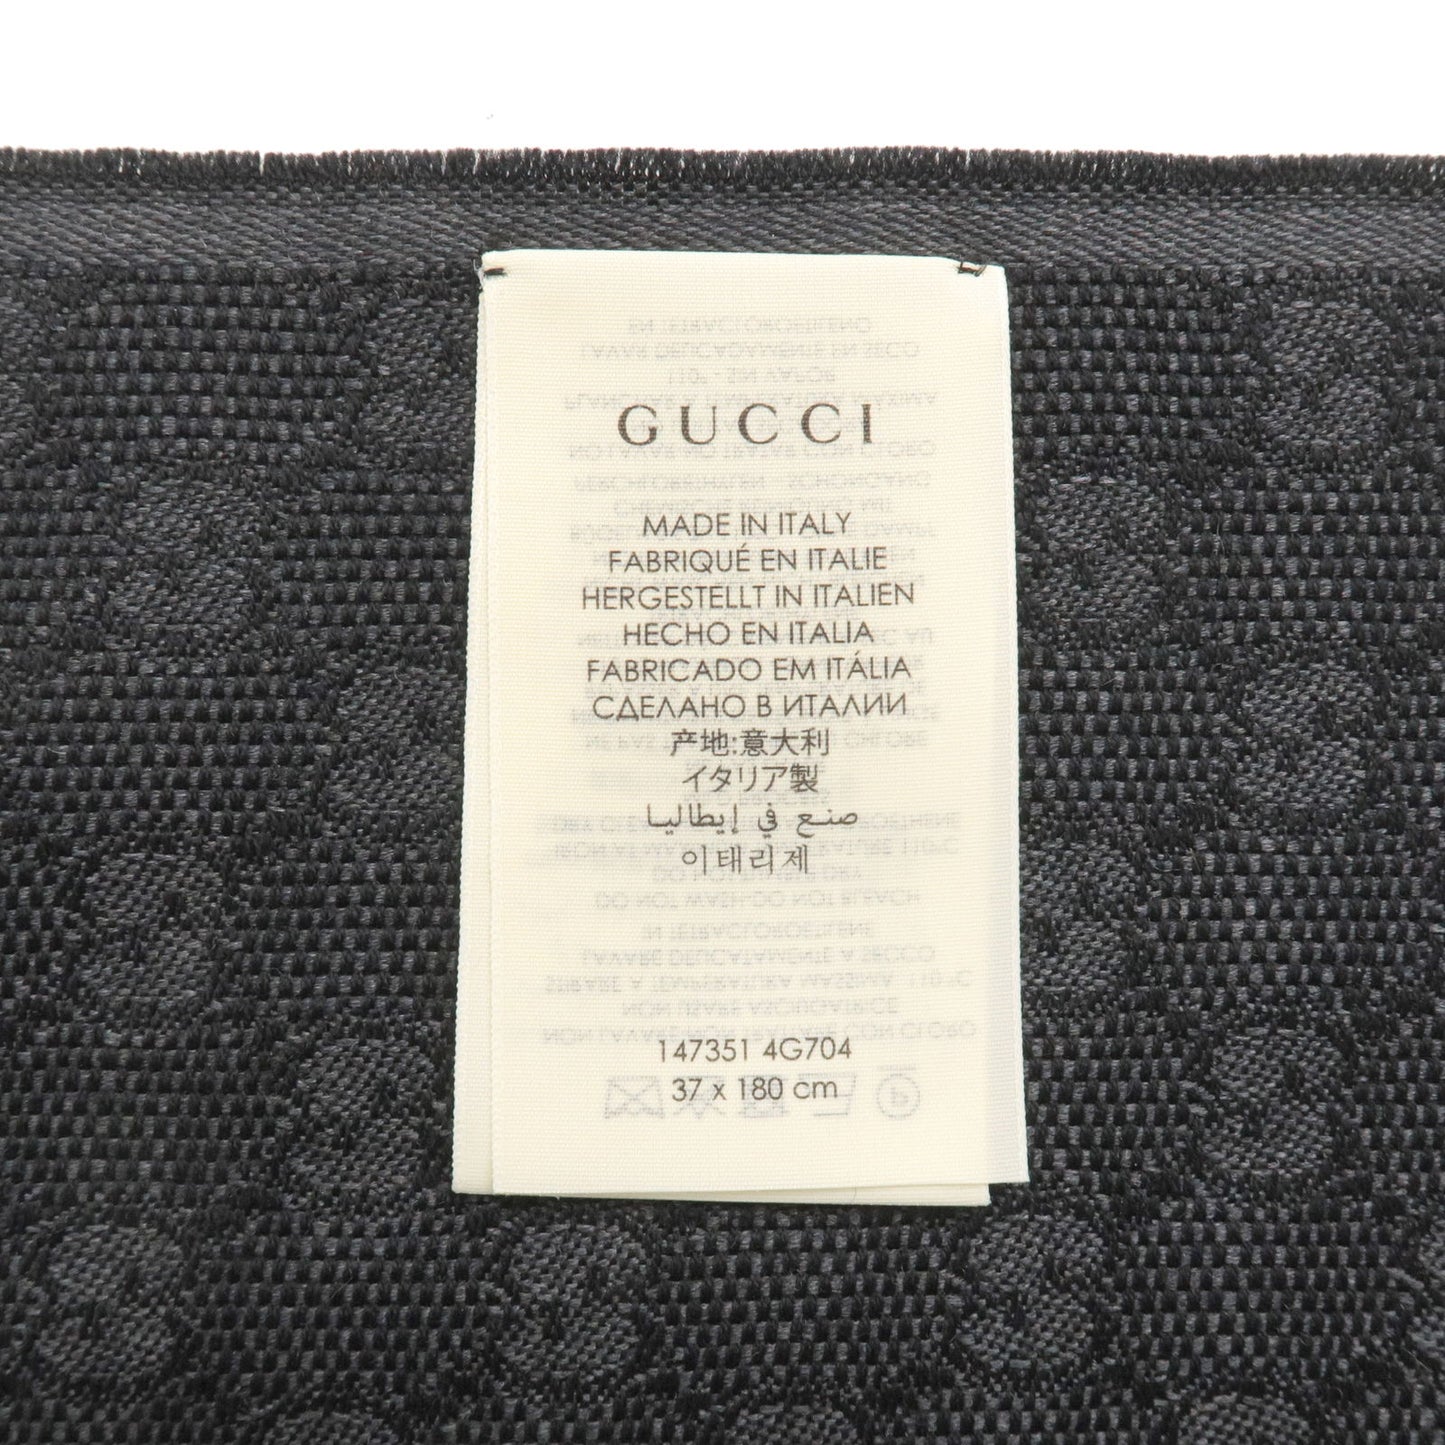 GUCCI Sherry GG  Wool 80% Silk 20% Scarf for Men Gray 147351